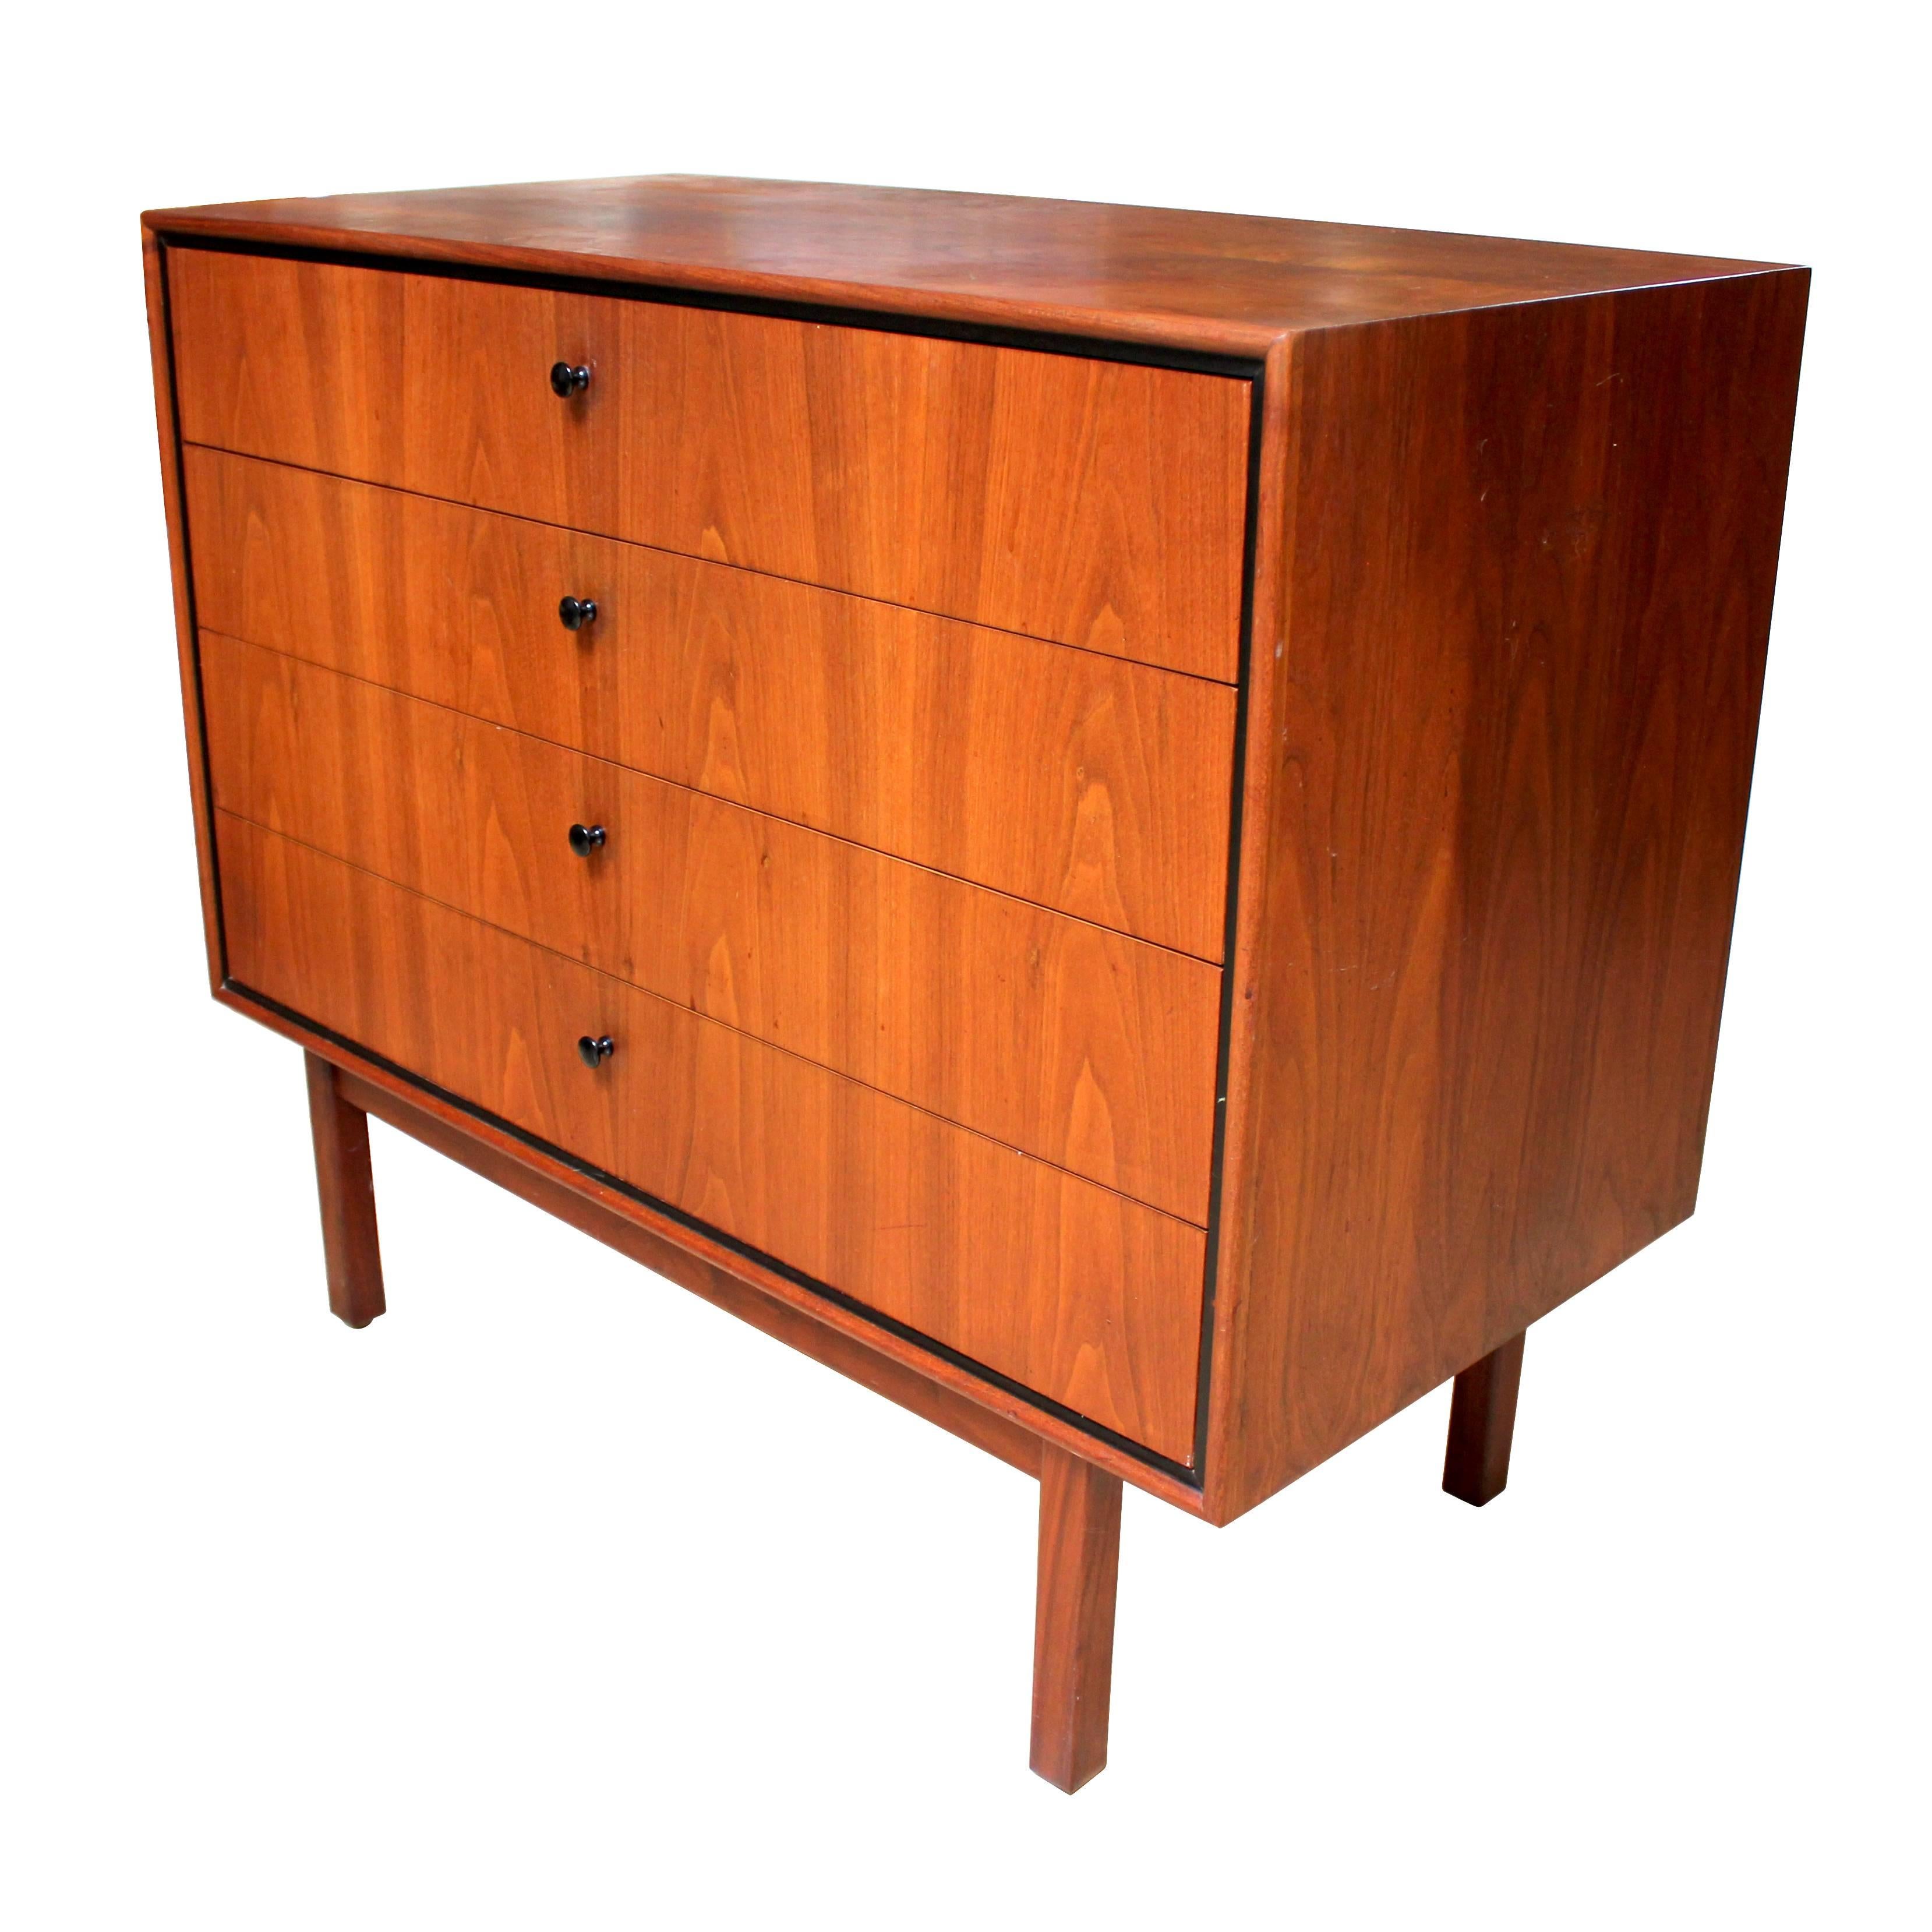 1950s walnut four-drawer dresser or chest of drawers designed by Milo Baughman for Arch Gordon. In excellent condition with black trim and grain matched drawer fronts. A beautiful example of Baughman's work for Arch Gordon, a collection much less